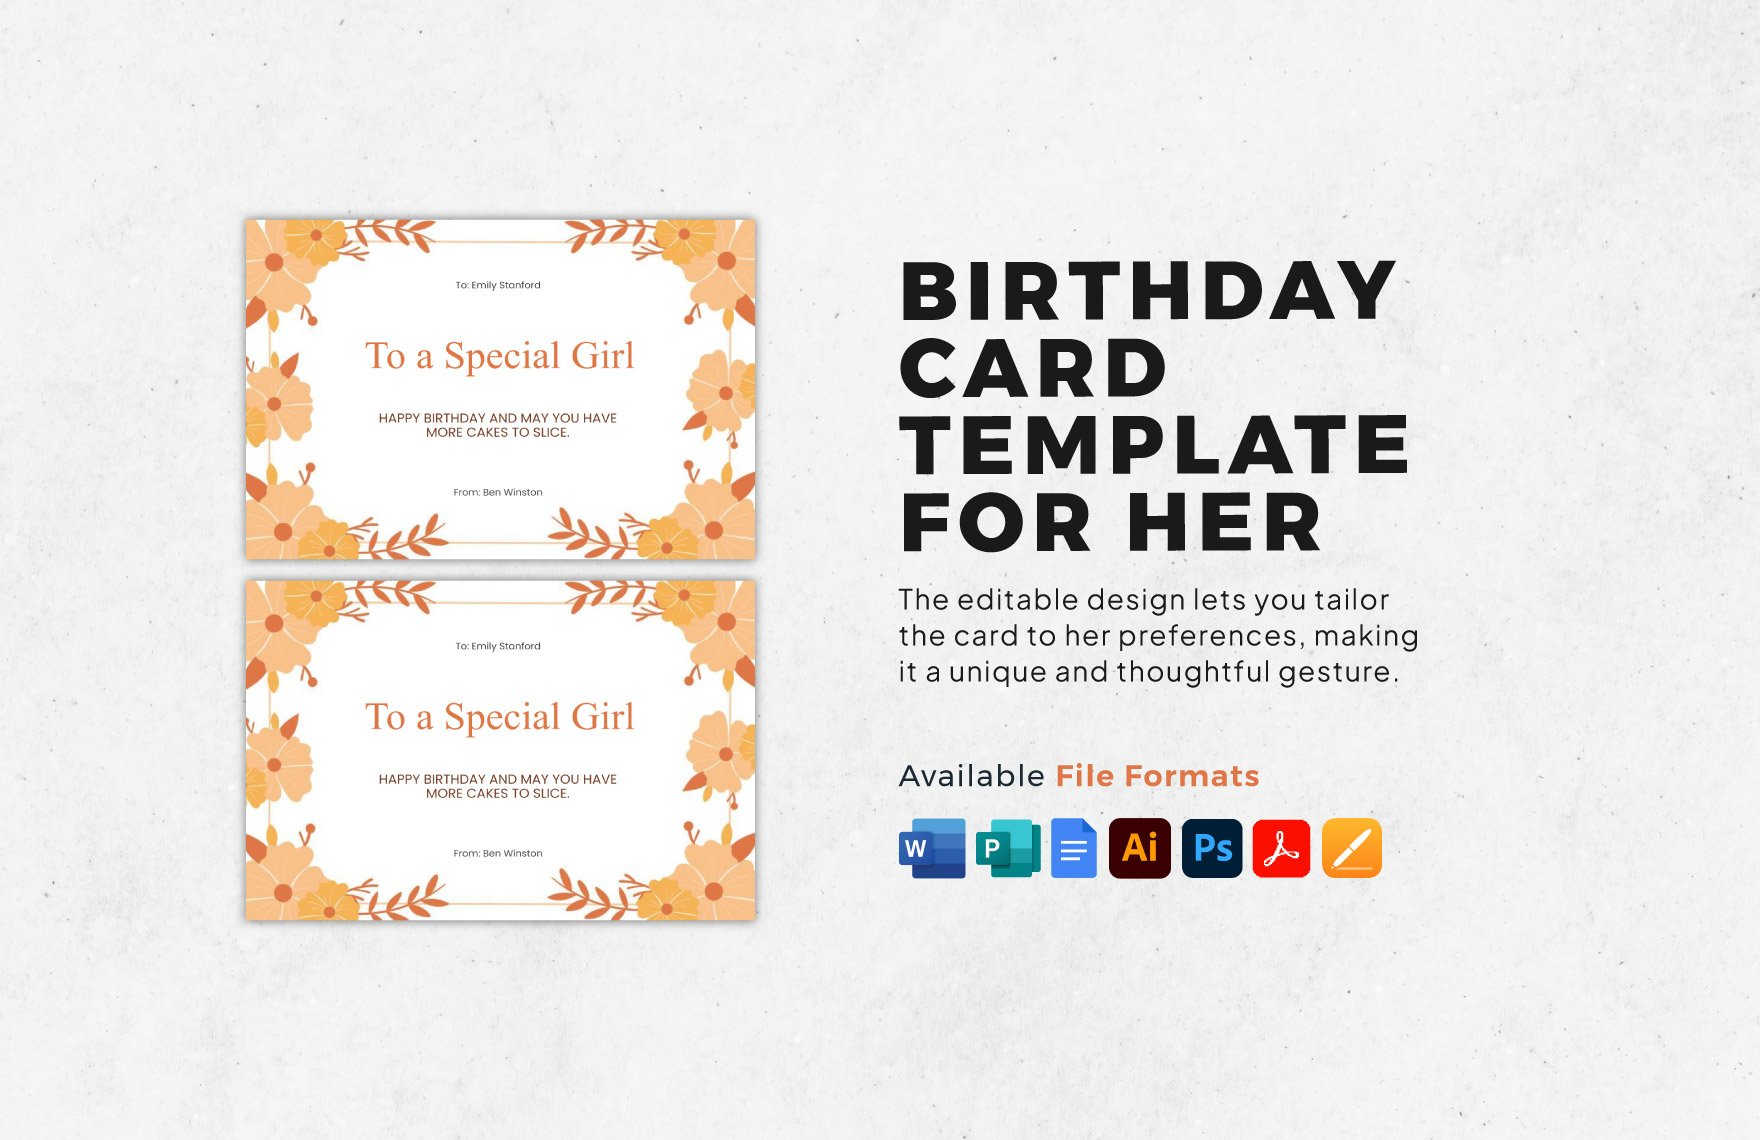 Birthday Card Template For Her